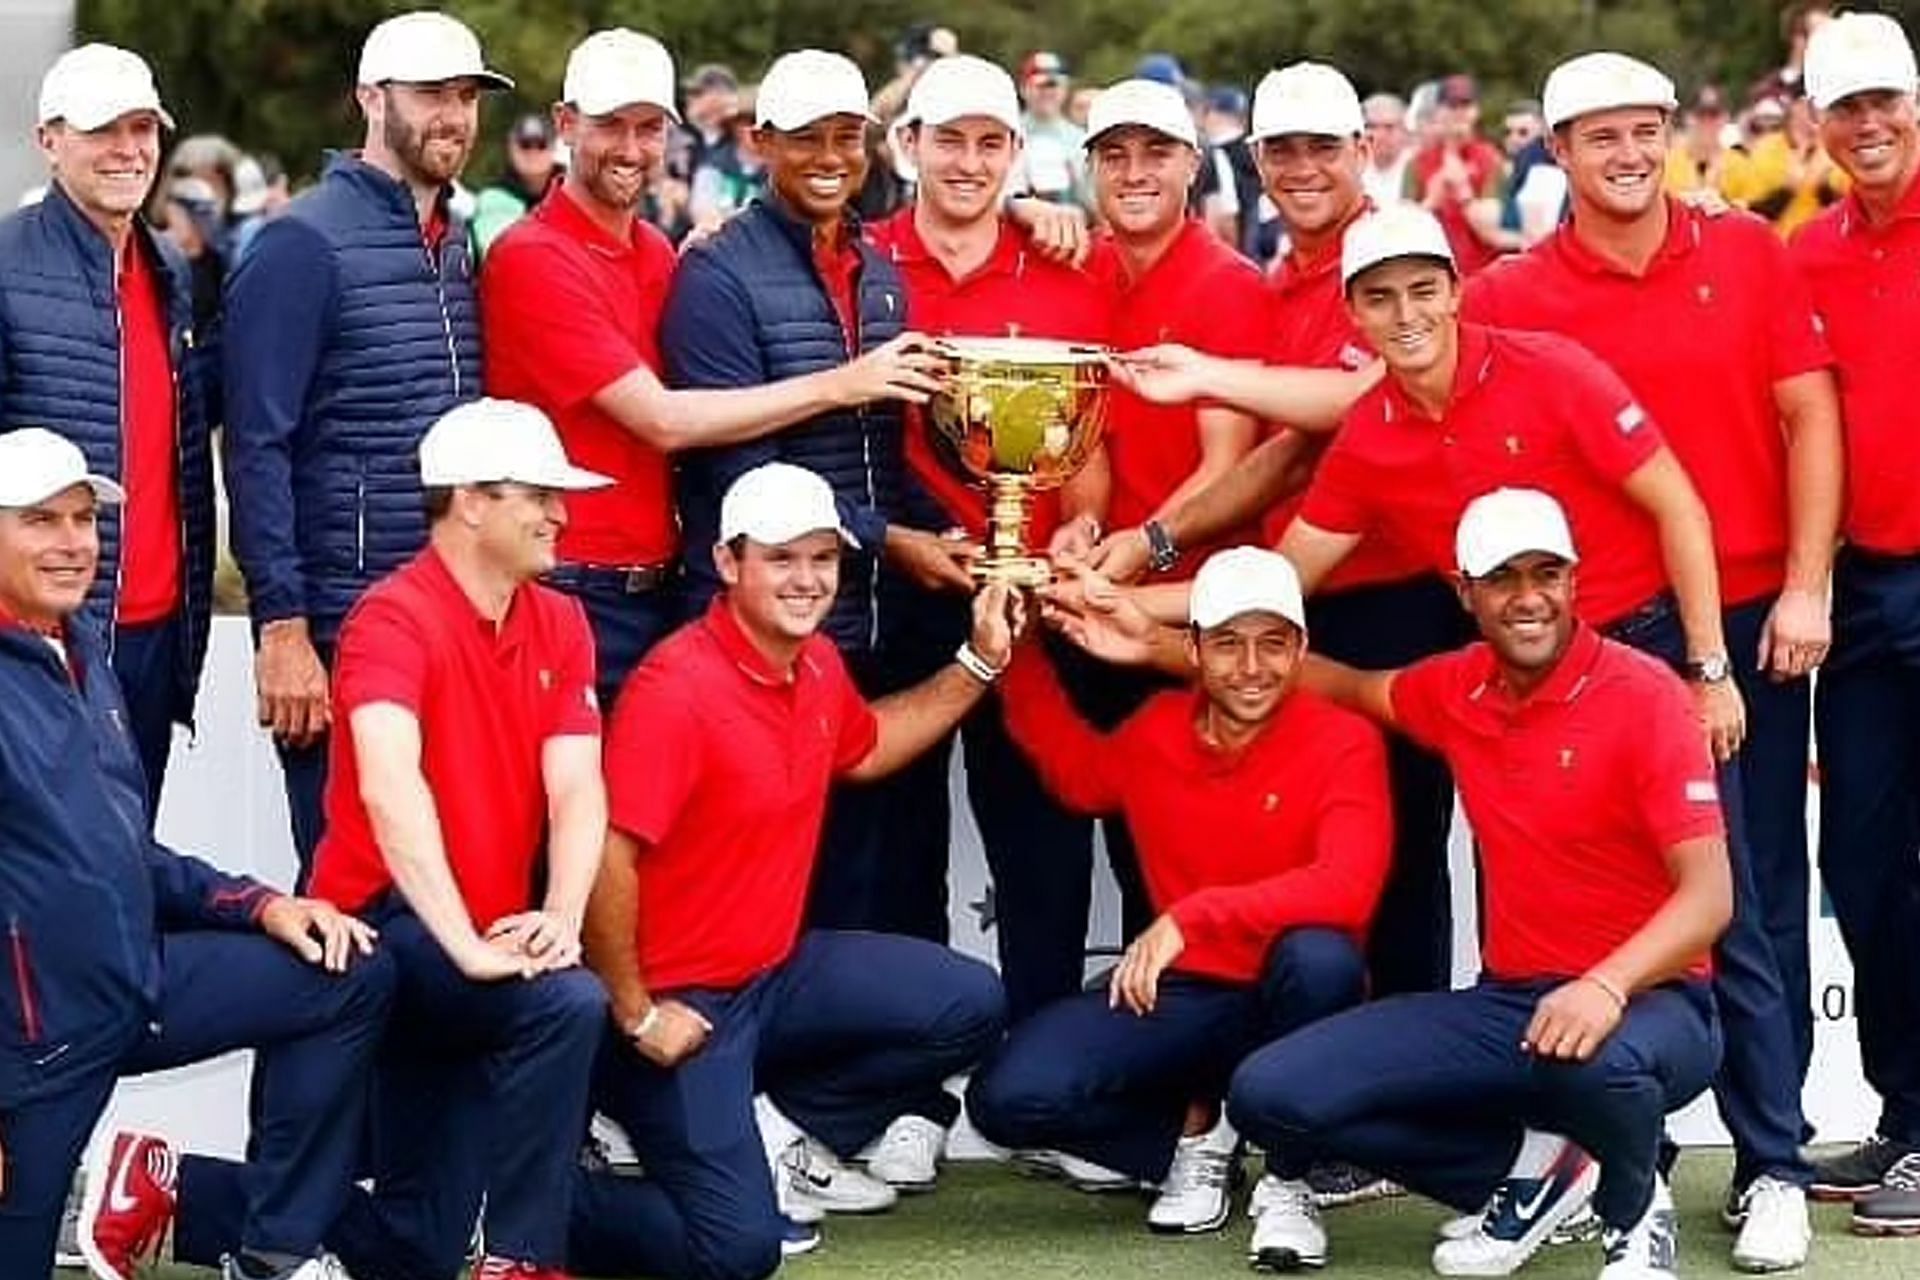 Team USA won the Presidents Cup 2019 (Image via Getty Images)